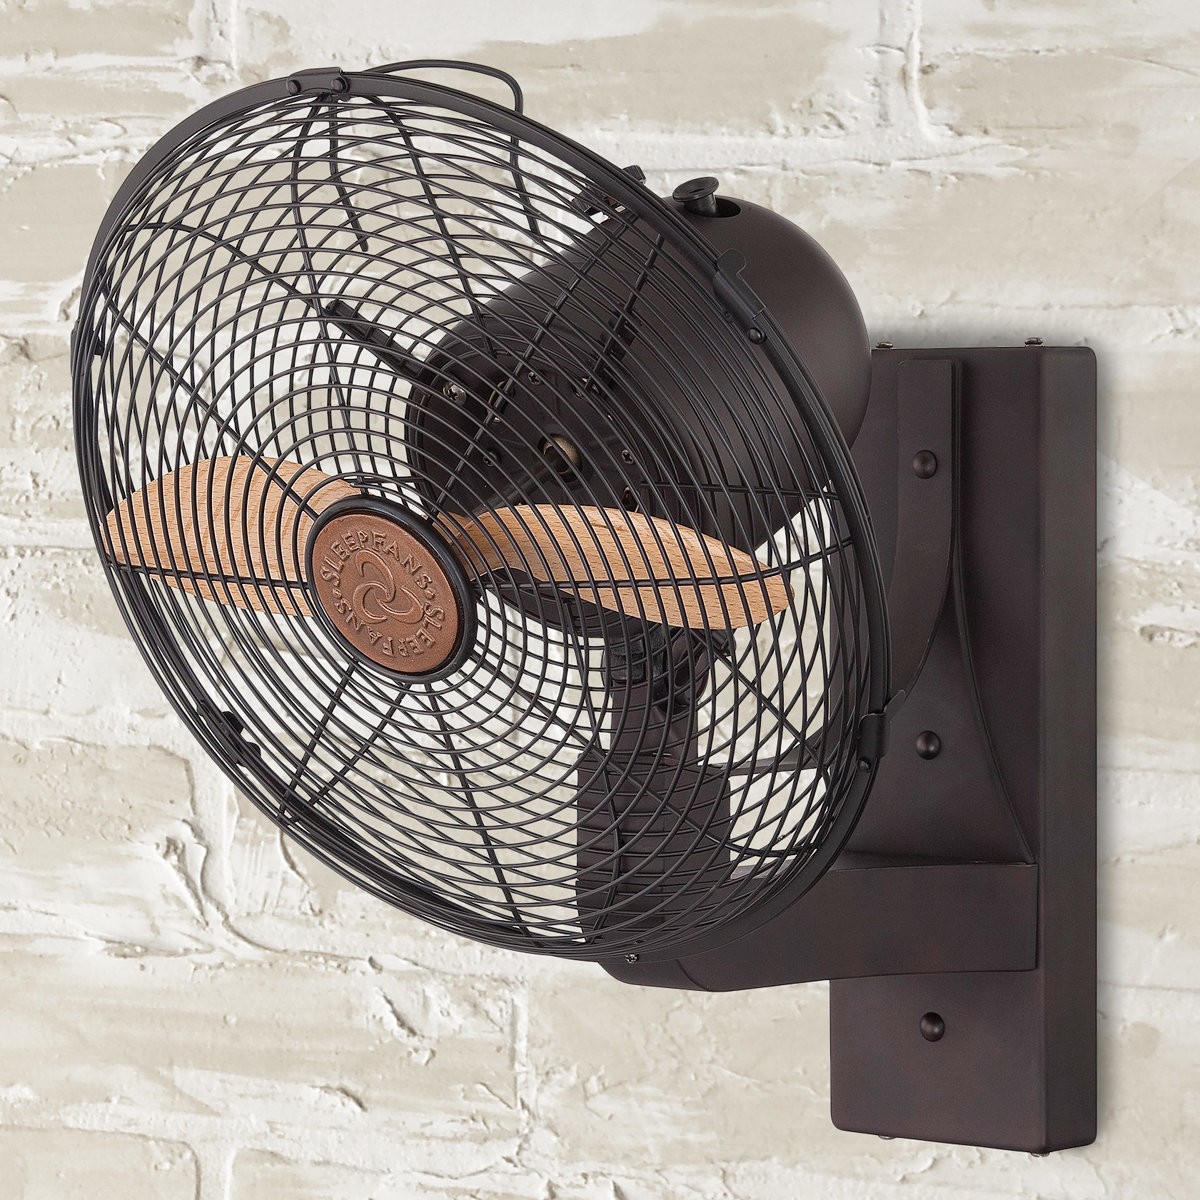 Wall mounted indoor outdoor fan shades of light